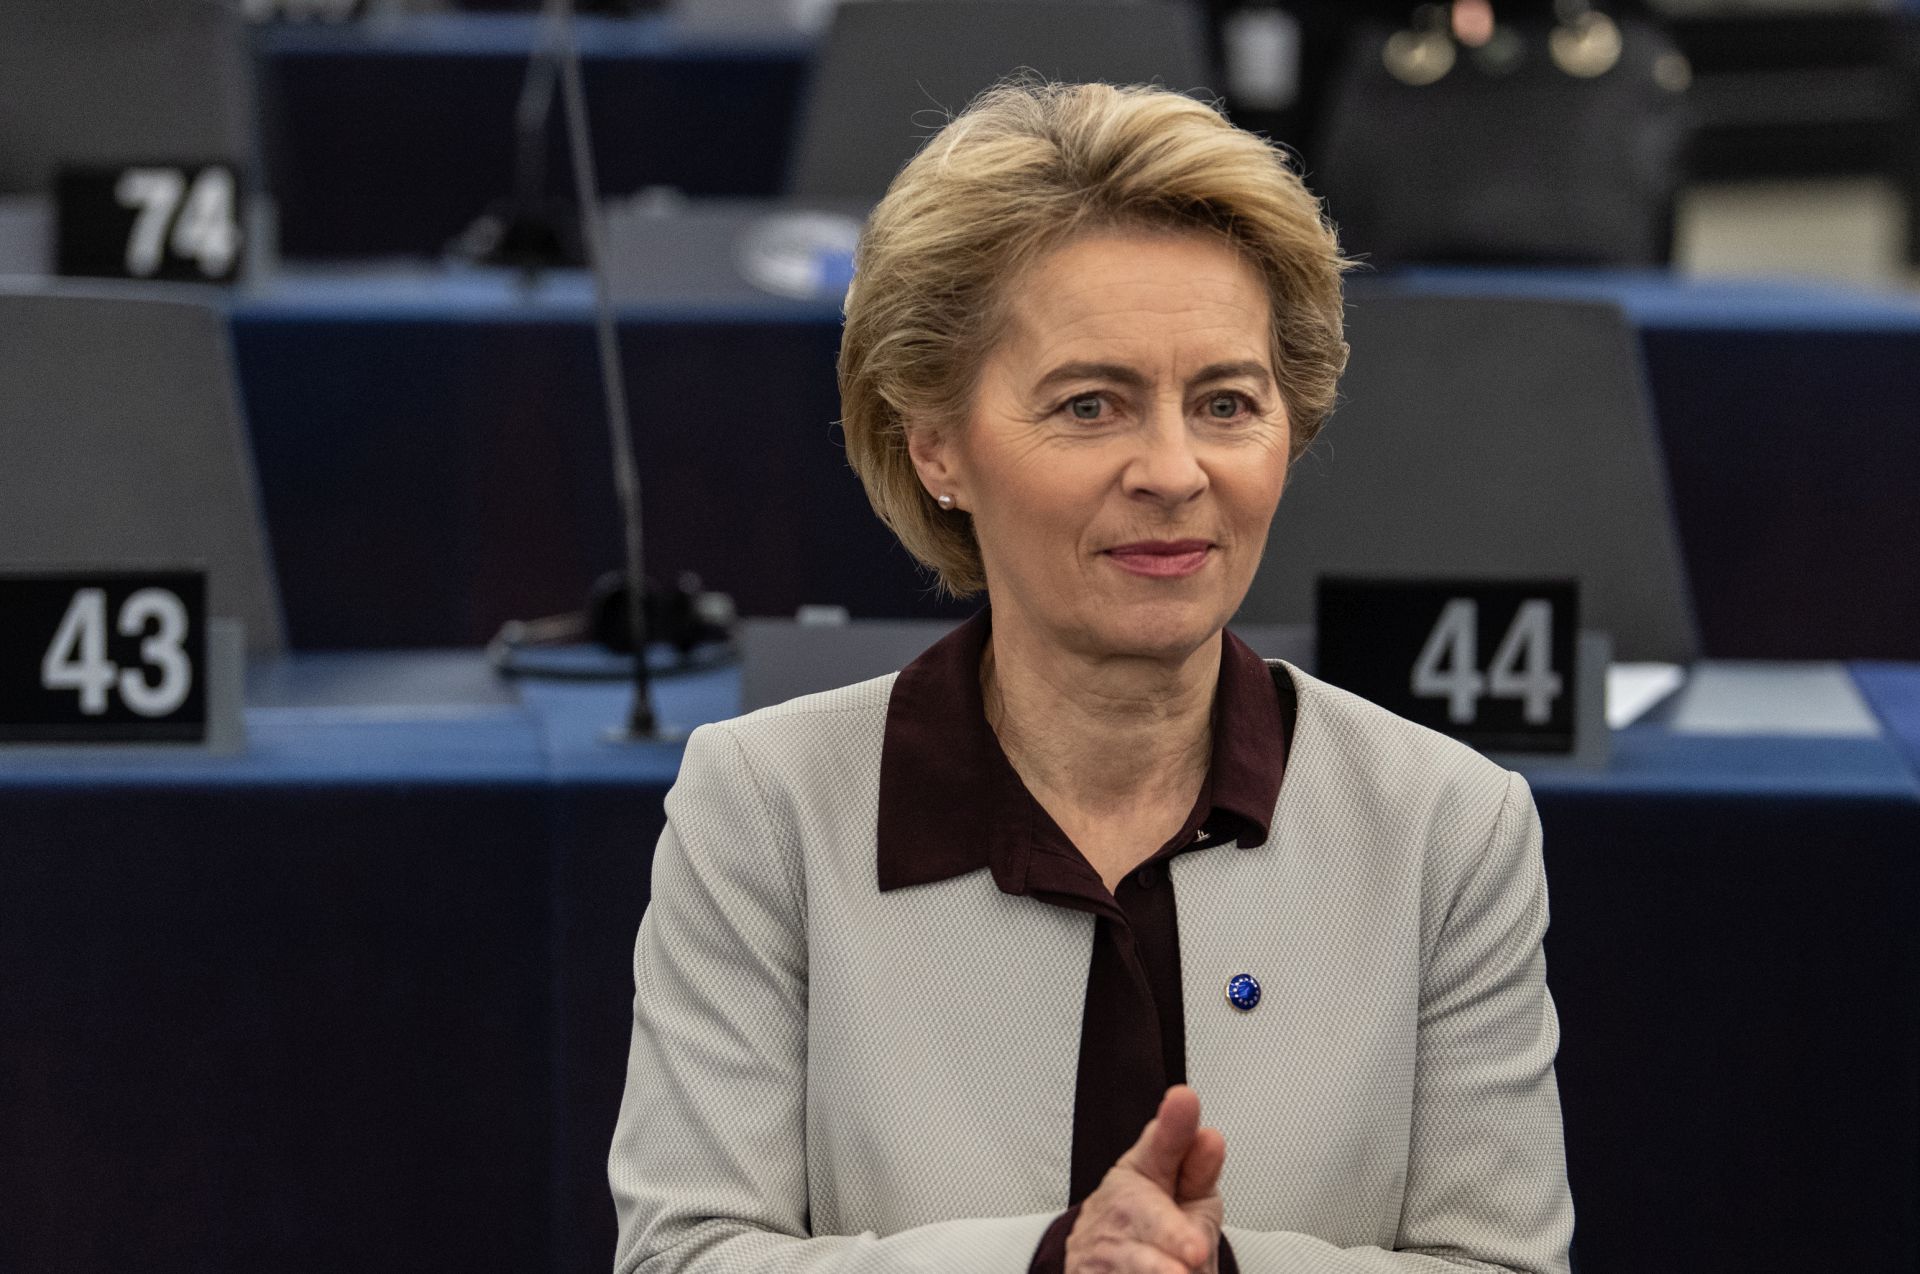 epa08212504 President of the European Commission Ursula von der Leyen reacts before her speech at the debate on the Preparation of the Extraordinary European Council Meeting on the Multiannual Financial Framework at the European Parliament in Strasbourg, France, 12 February 2020. The extraordinary meeting will take place on 20 February 2020.  EPA/PATRICK SEEGER